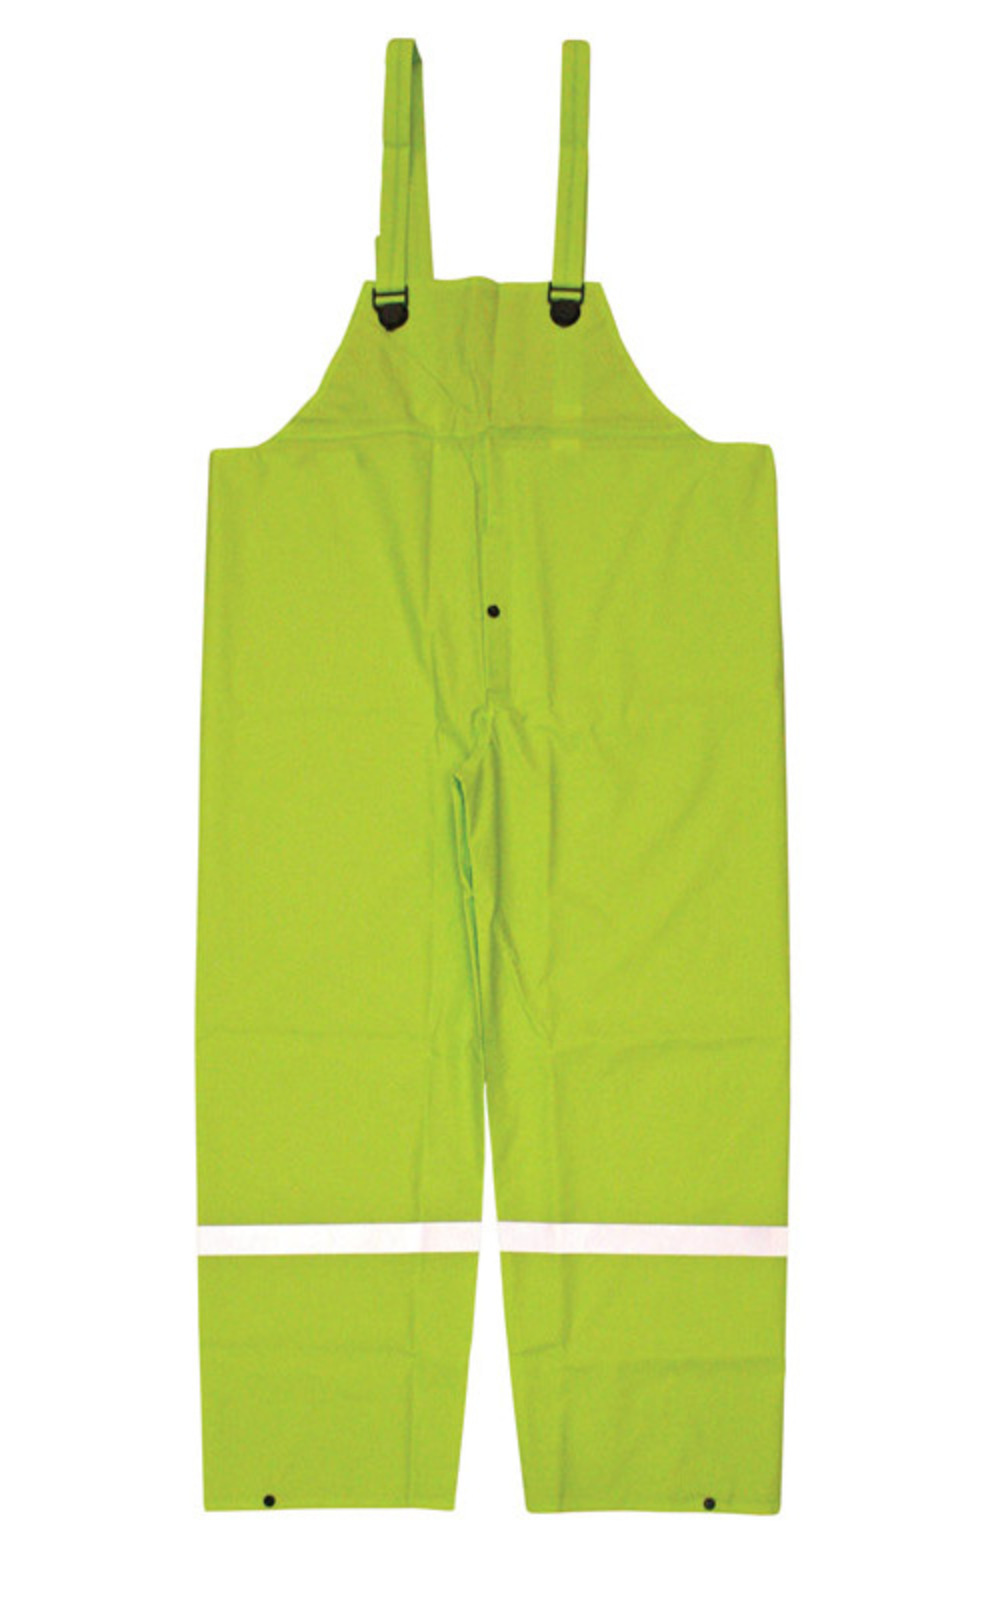 Boss Gloves Lined Bib Overalls - image 2 of 2